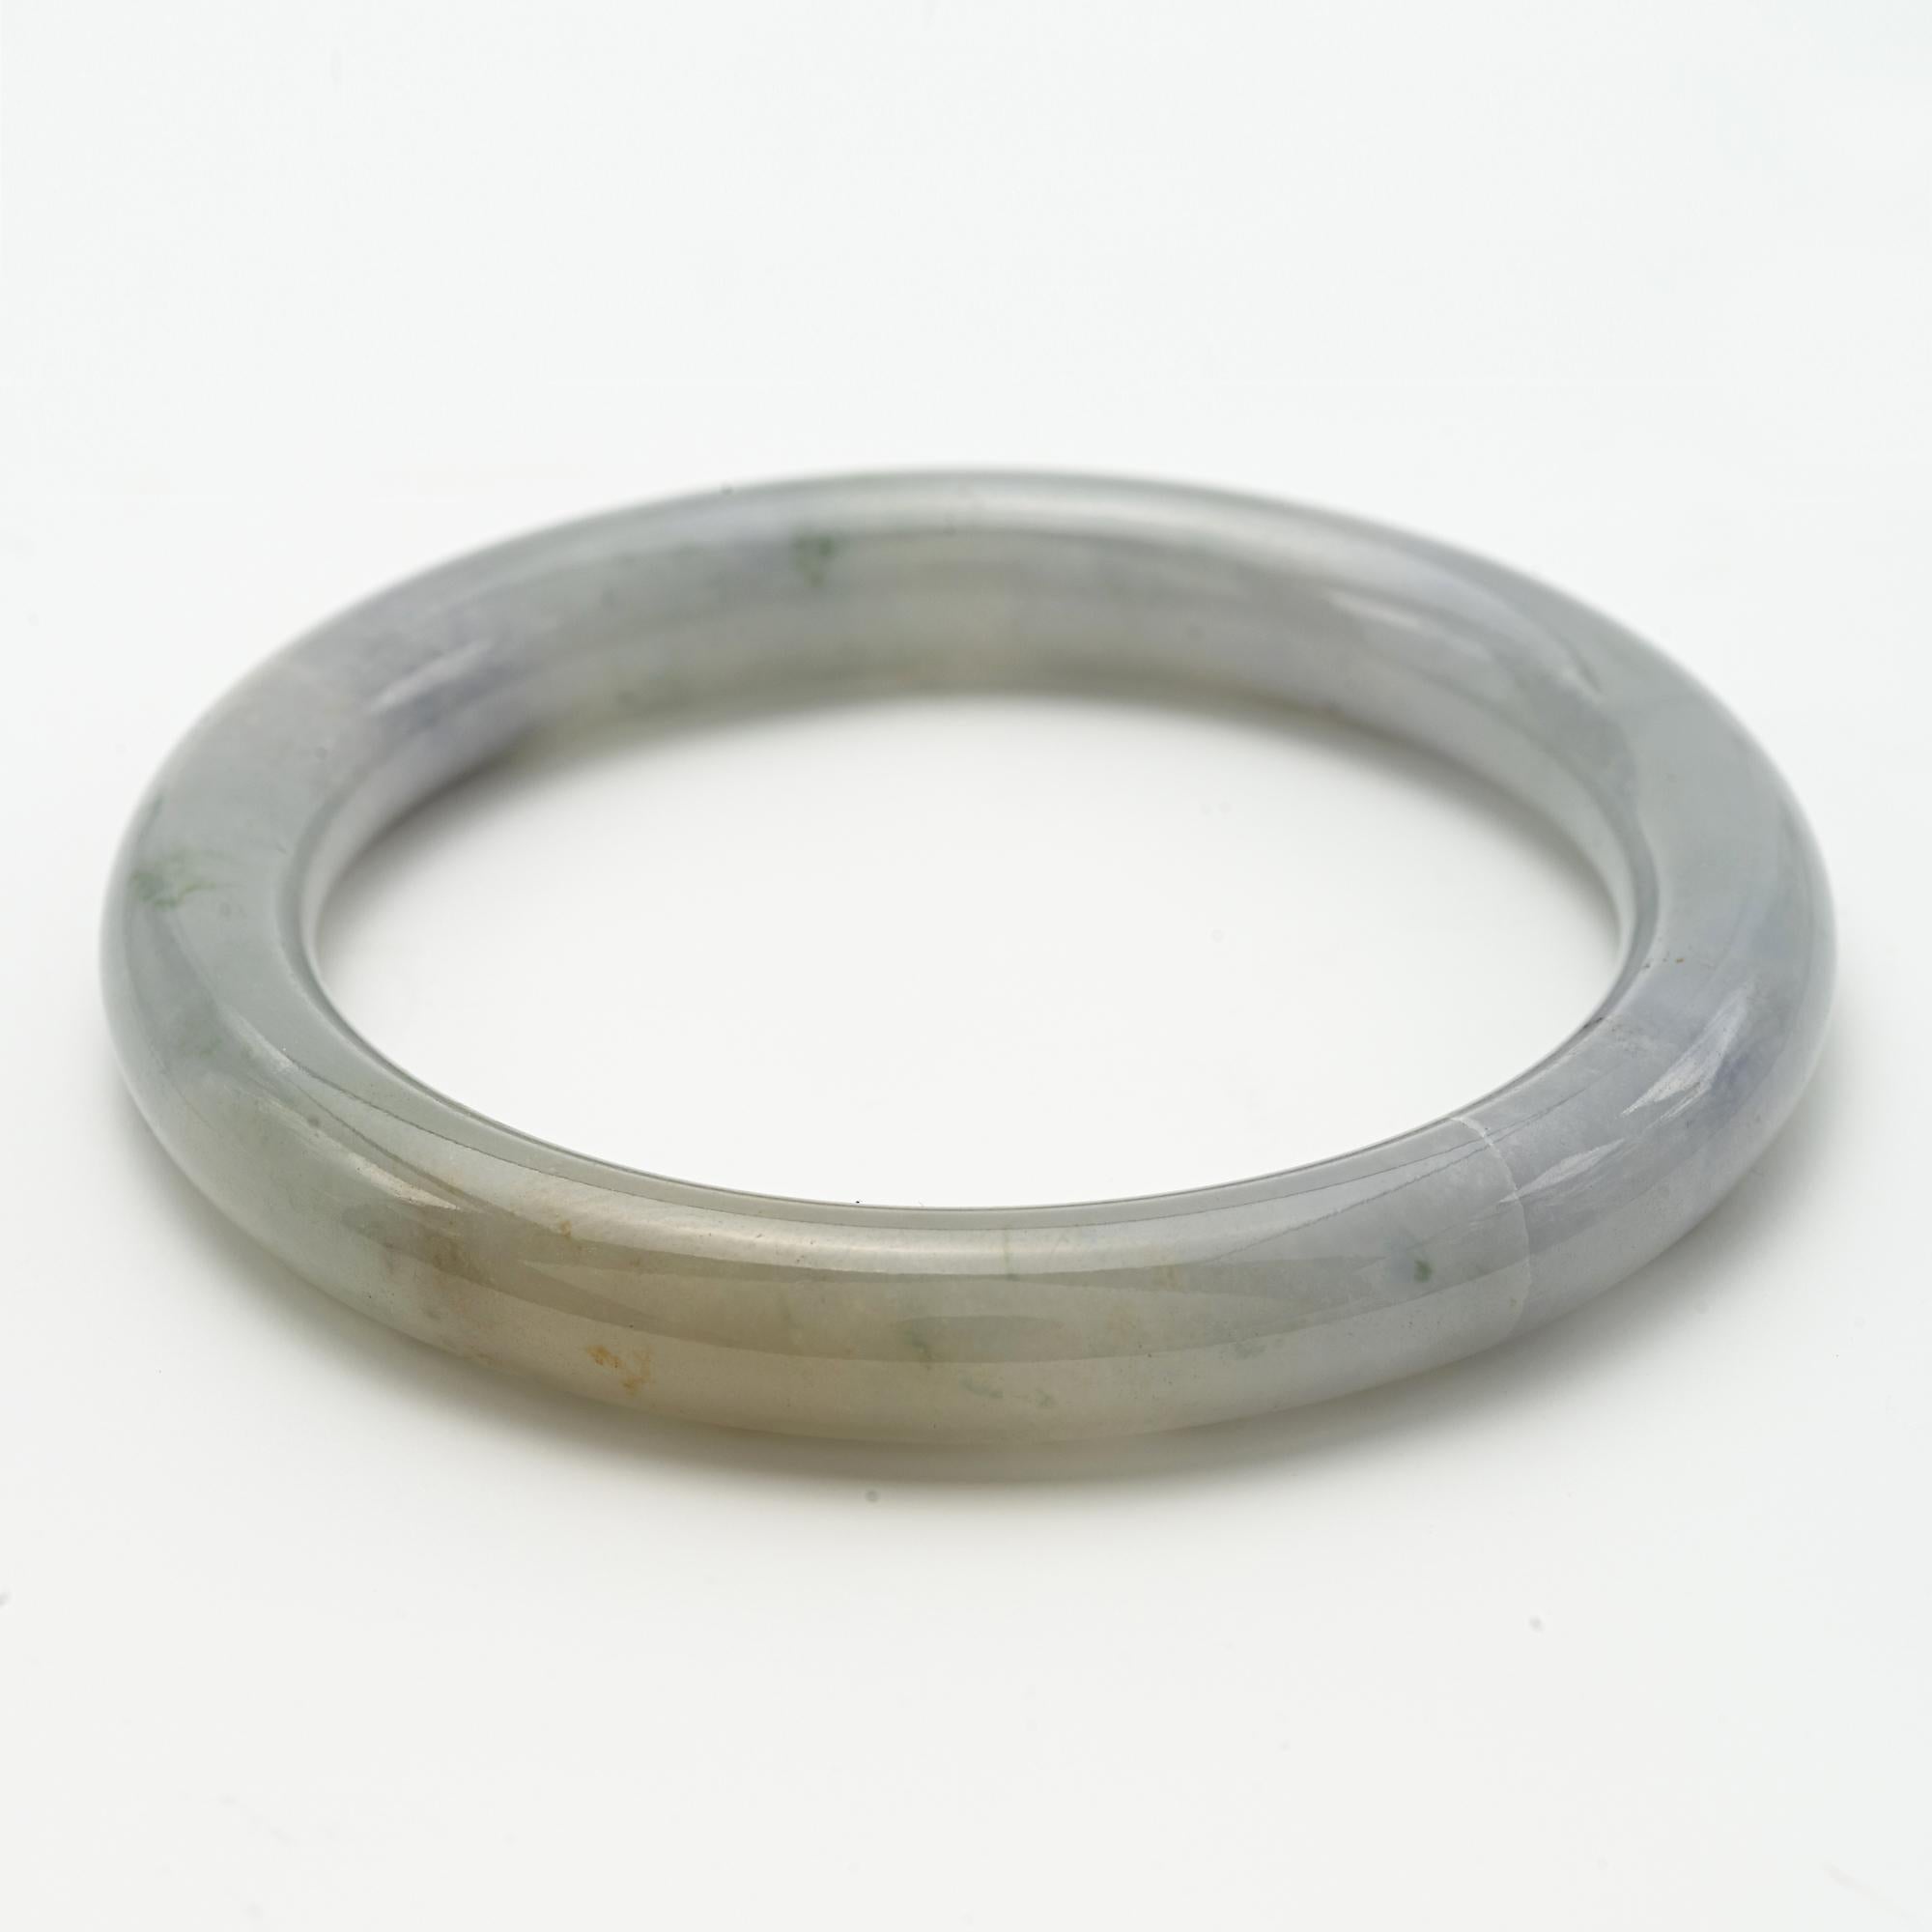 
A Pale Celadon Jade Bangle
the bangle with subtle evergreen inclusions
2 inch circumference
